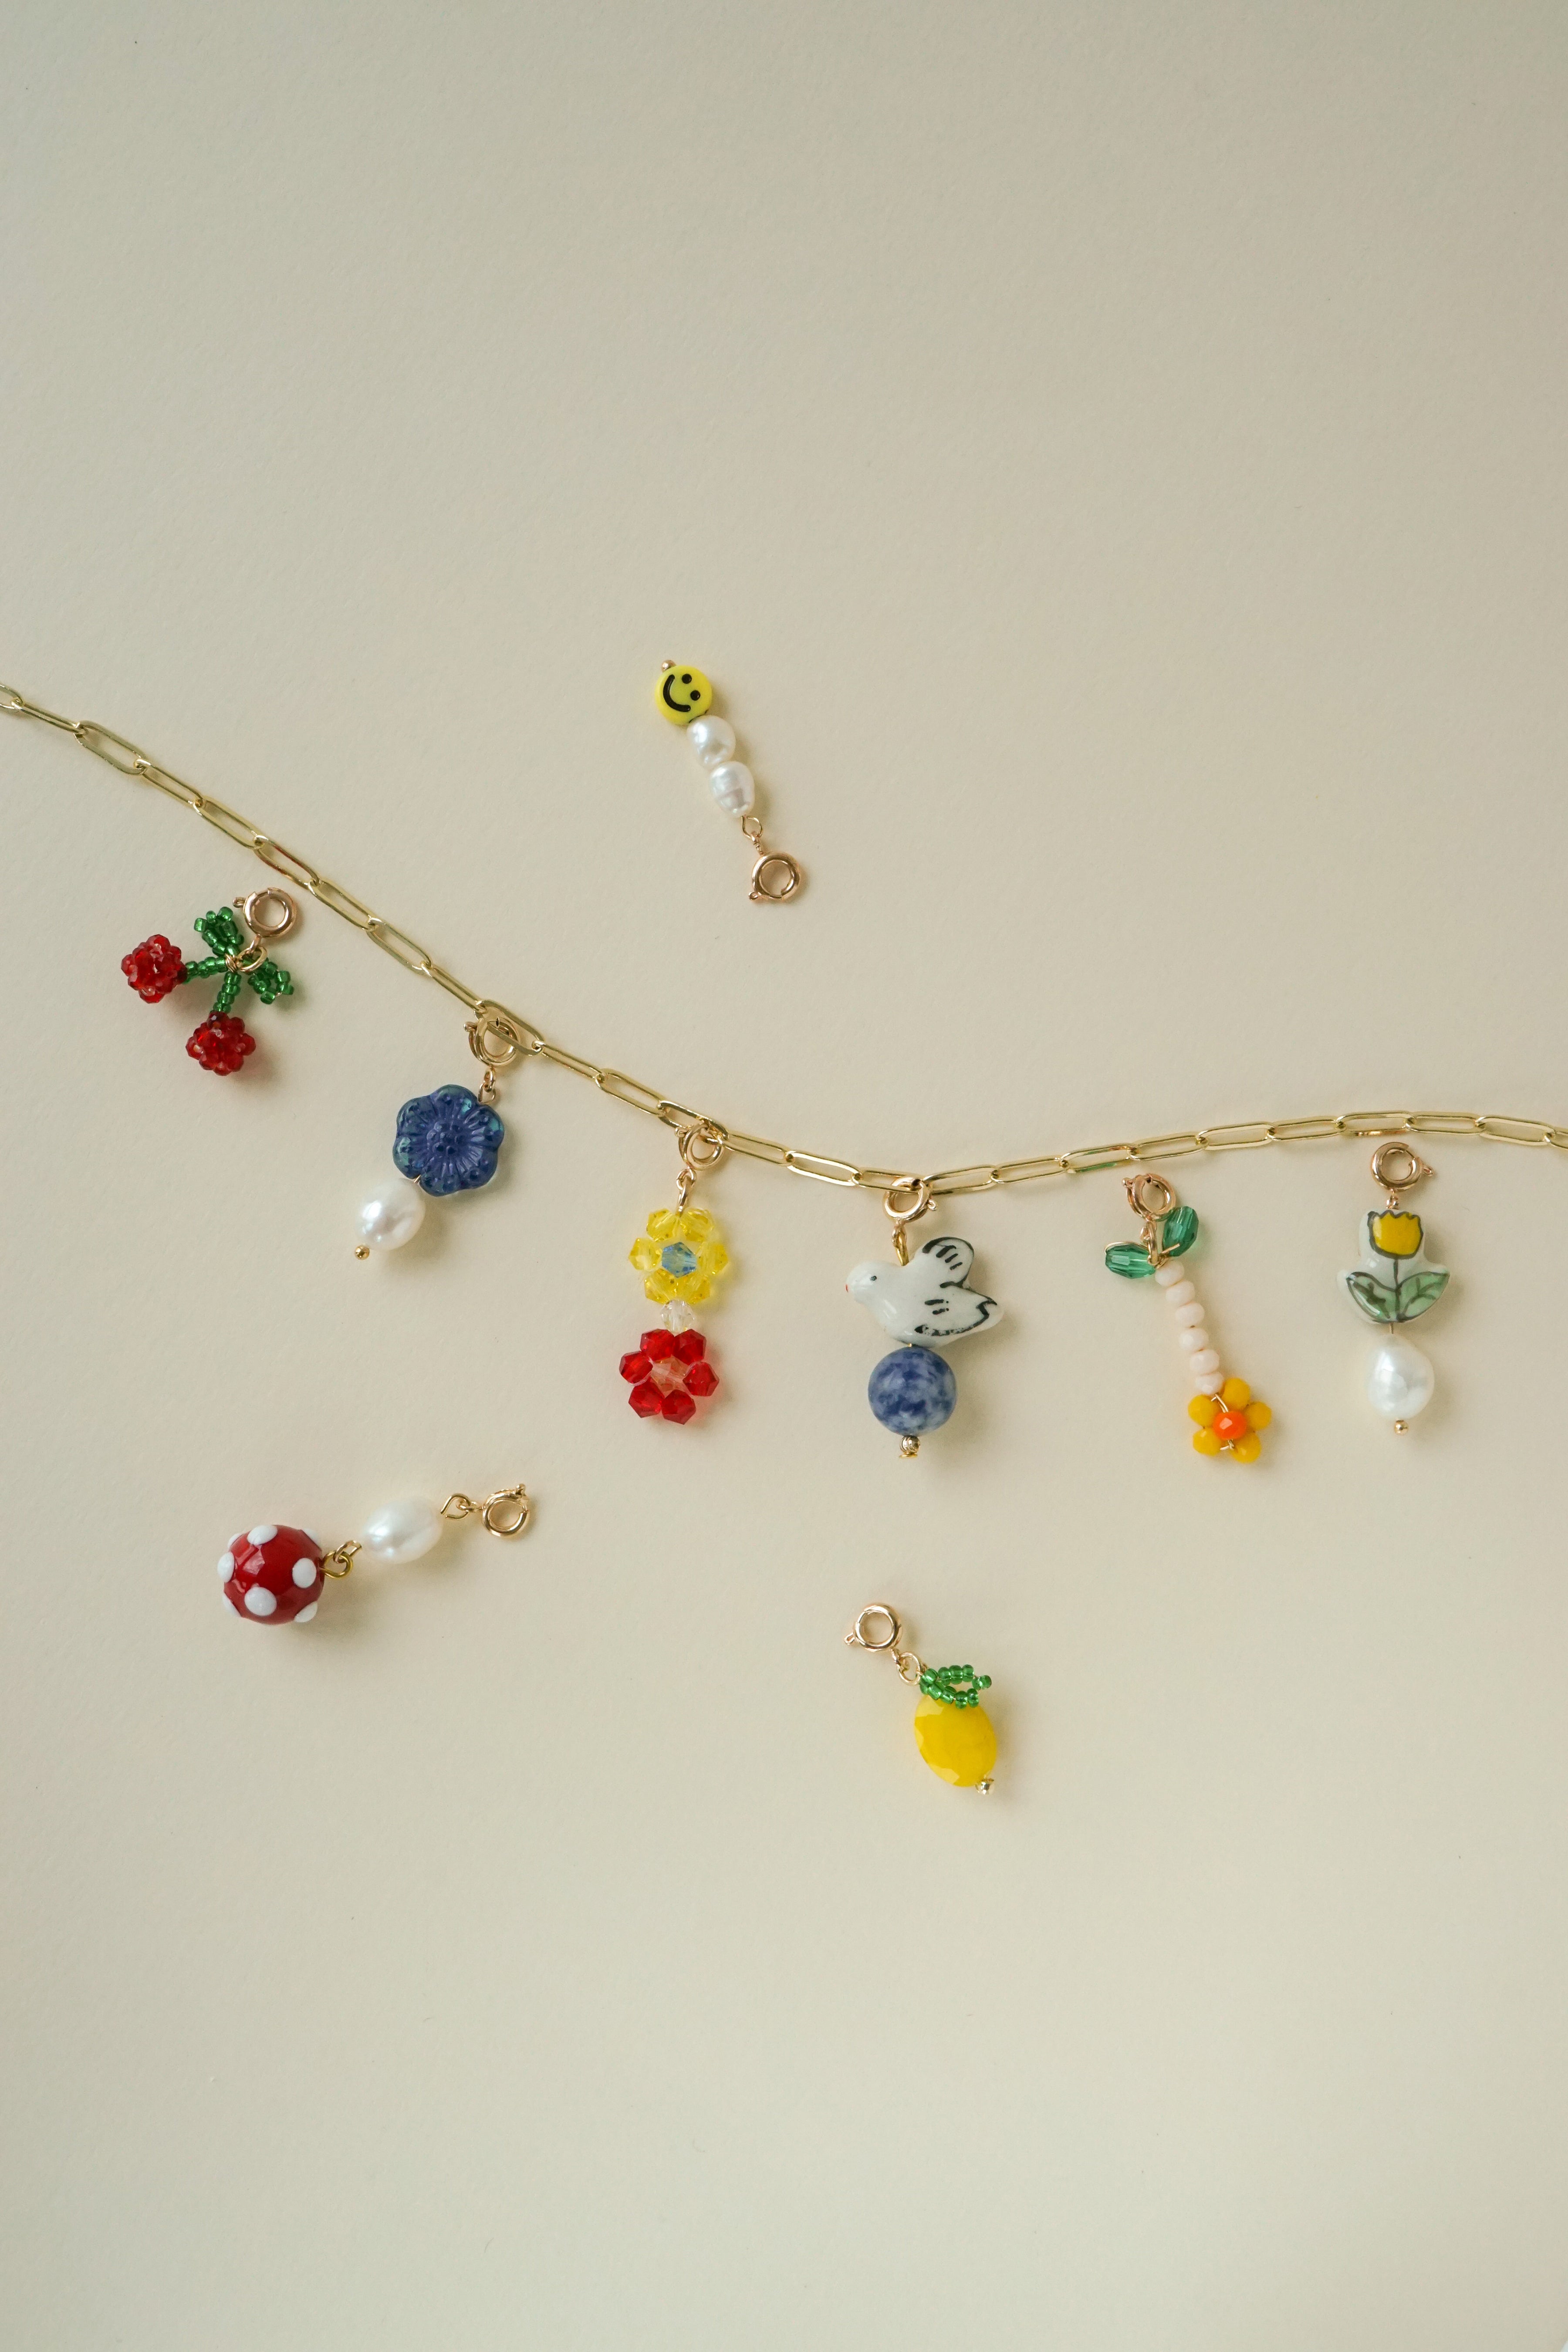 Garden Party Necklace (Set of 15 Charms)